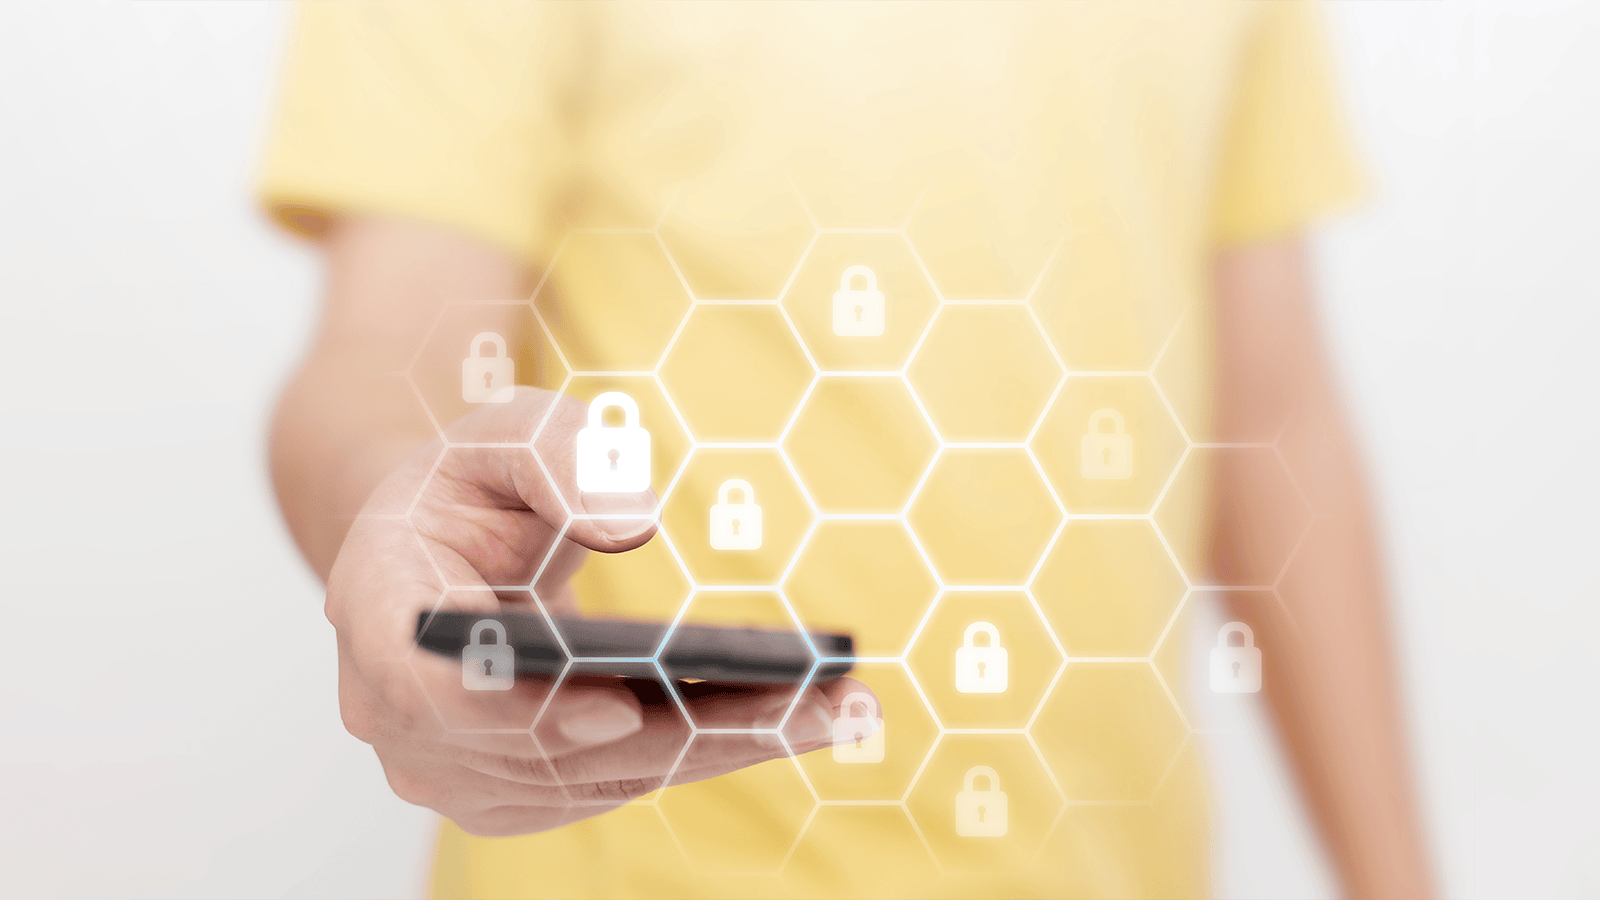 person holding smartphone with honeycomb locks